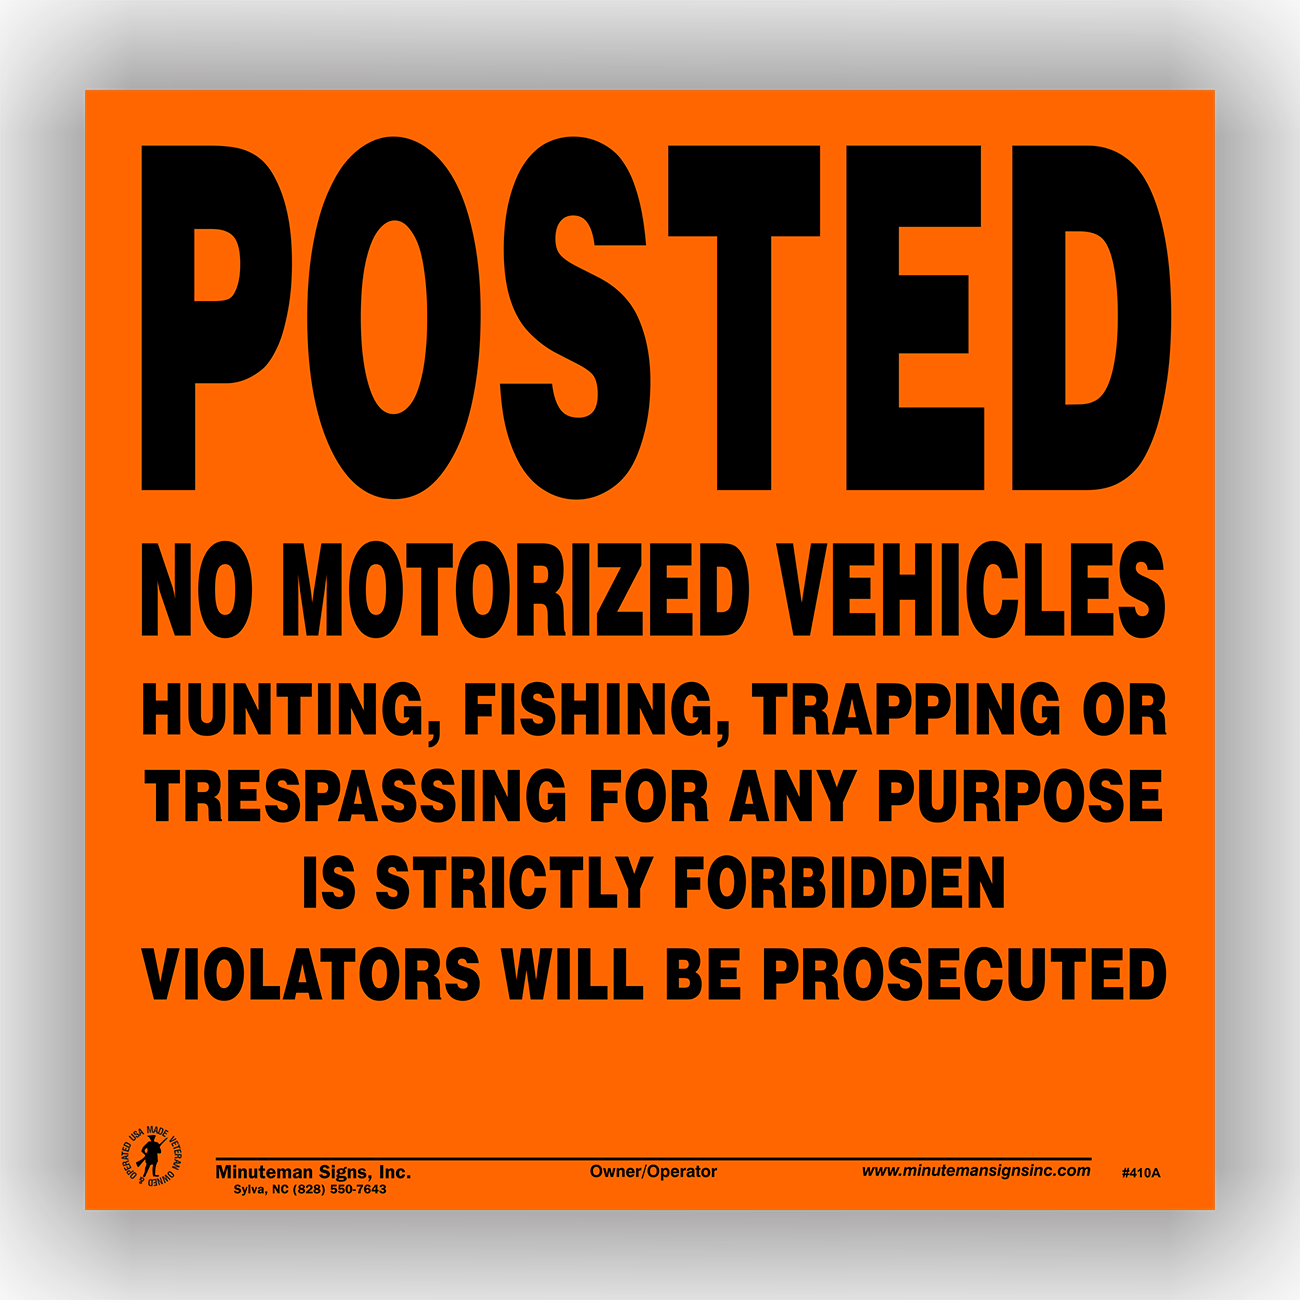 Posted No Motorized Vehicles Hunting Fishing Trapping Or